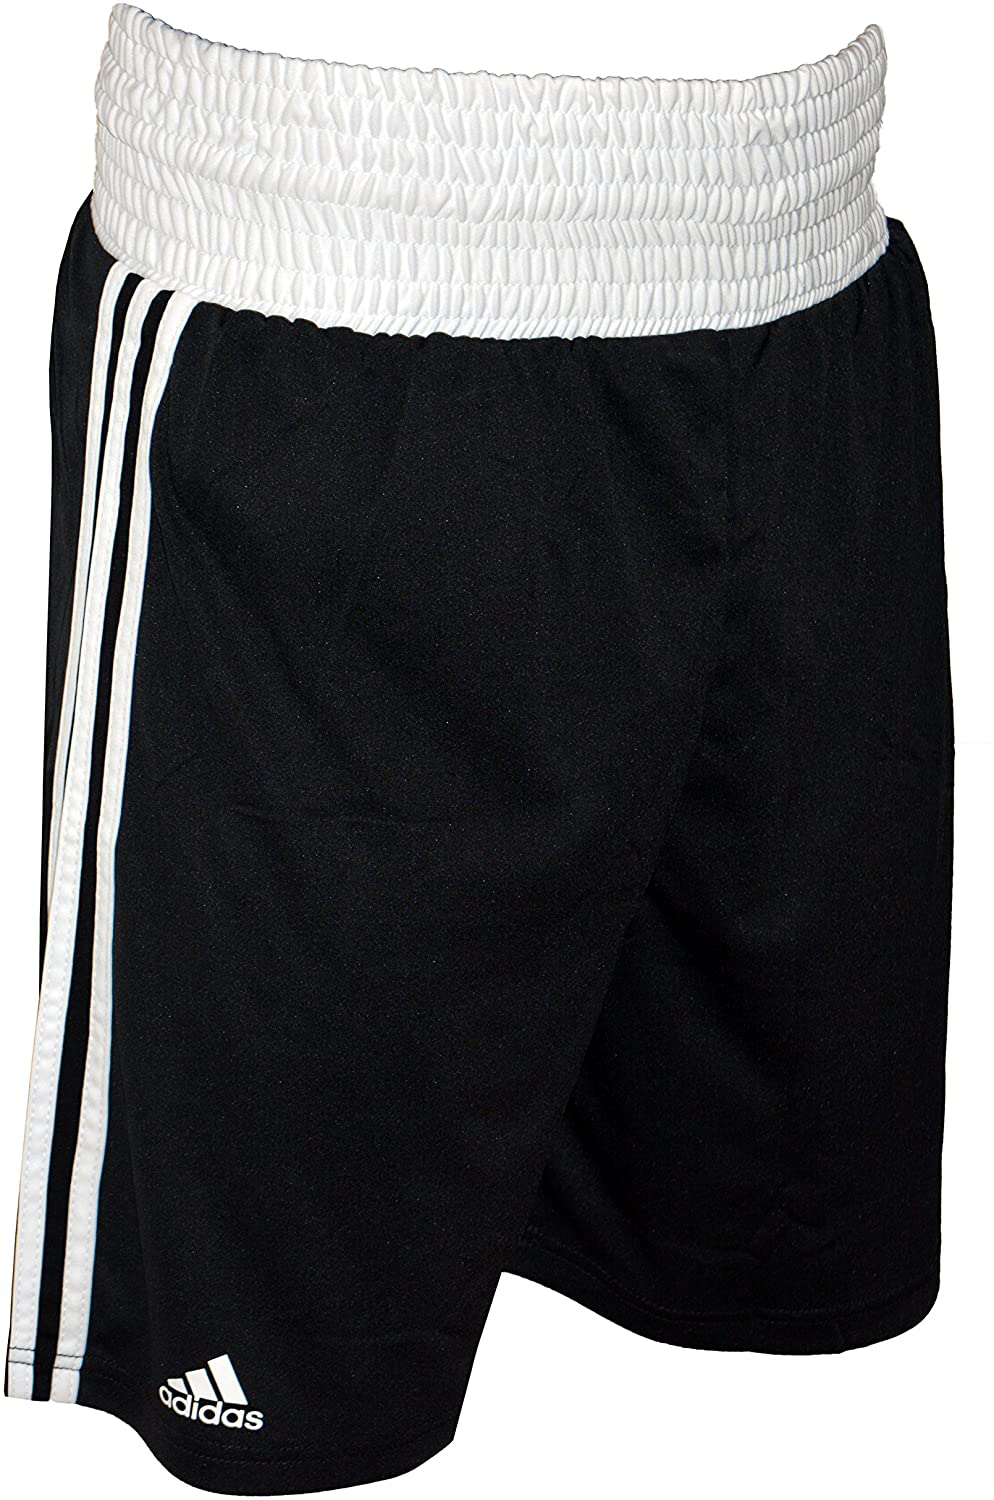 adidas Boxing Punch Line Shorts - AIBA Approved